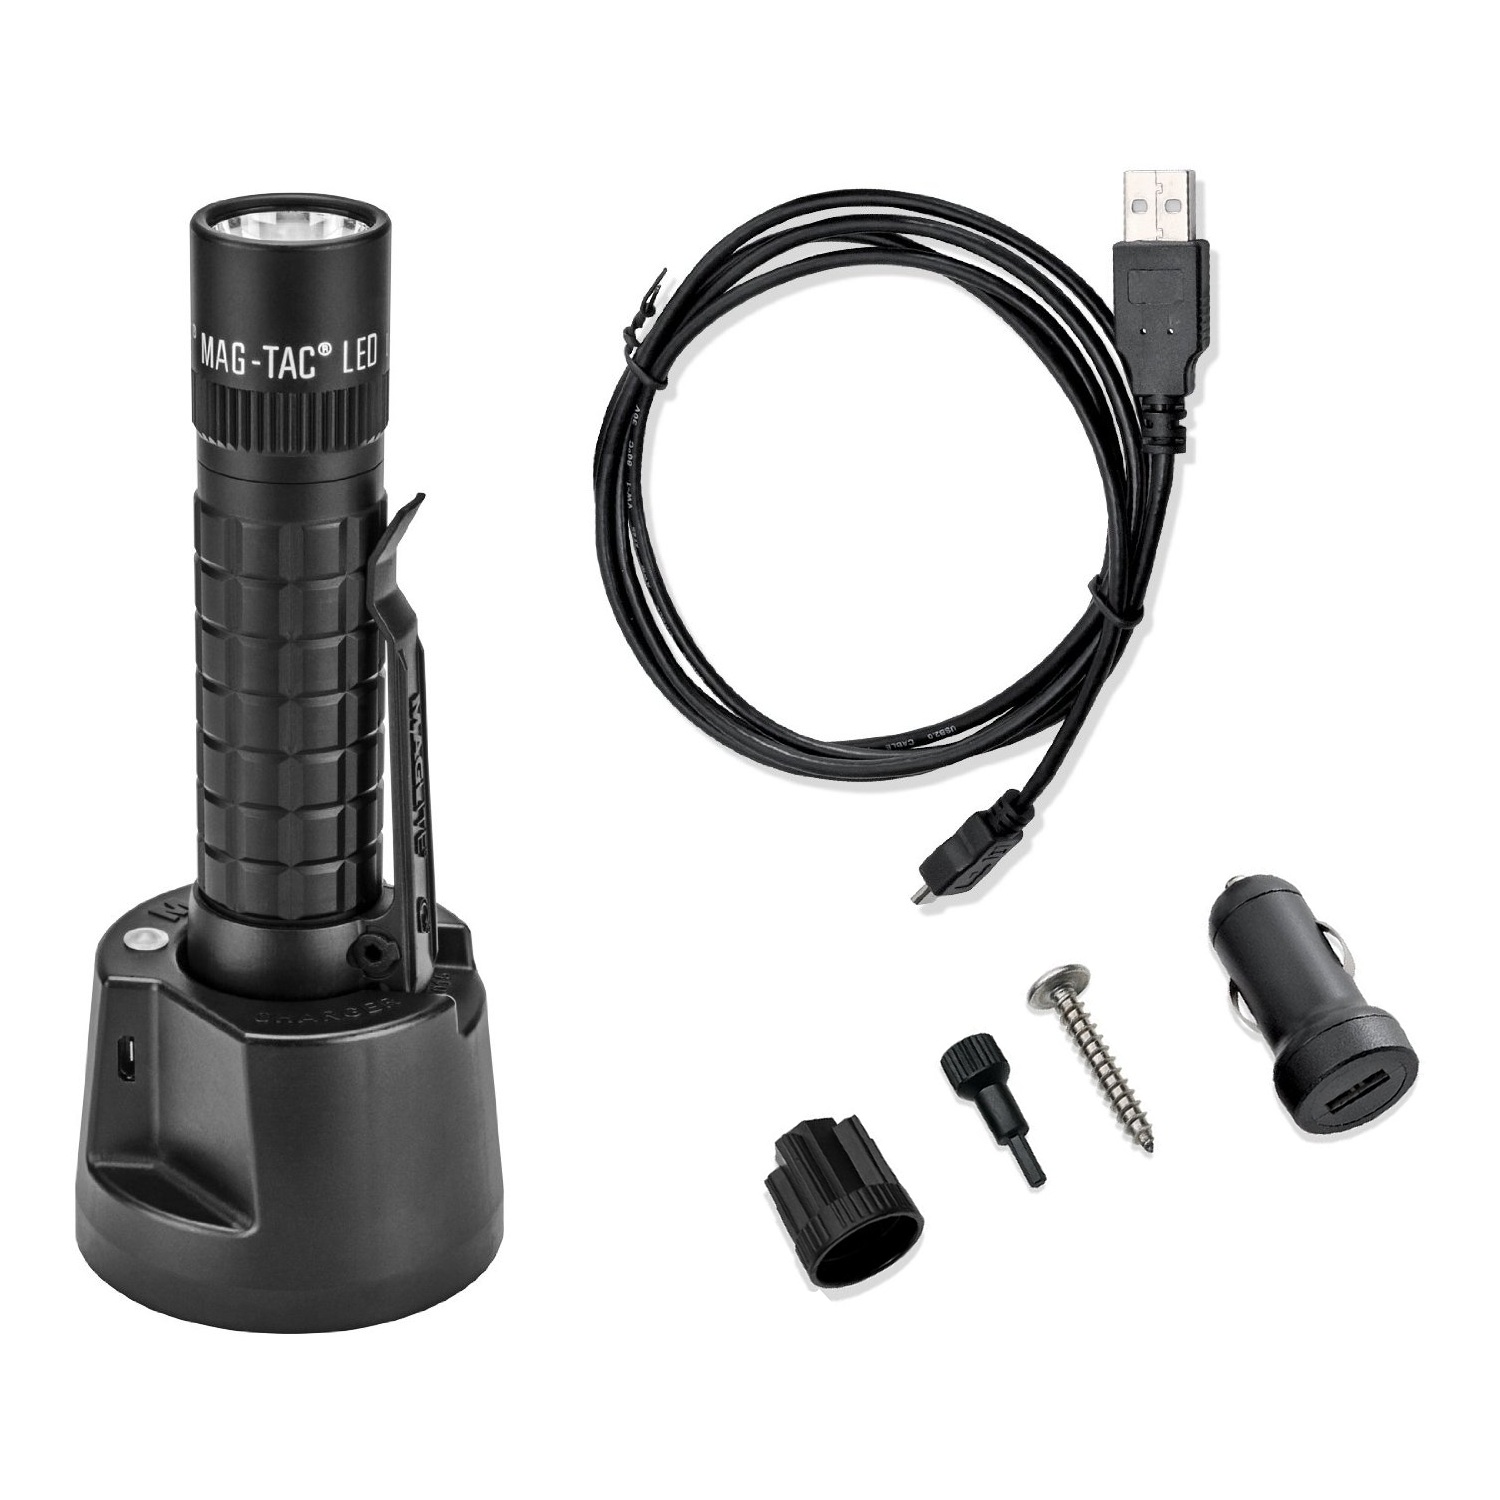 Torche MagLite rechargeable